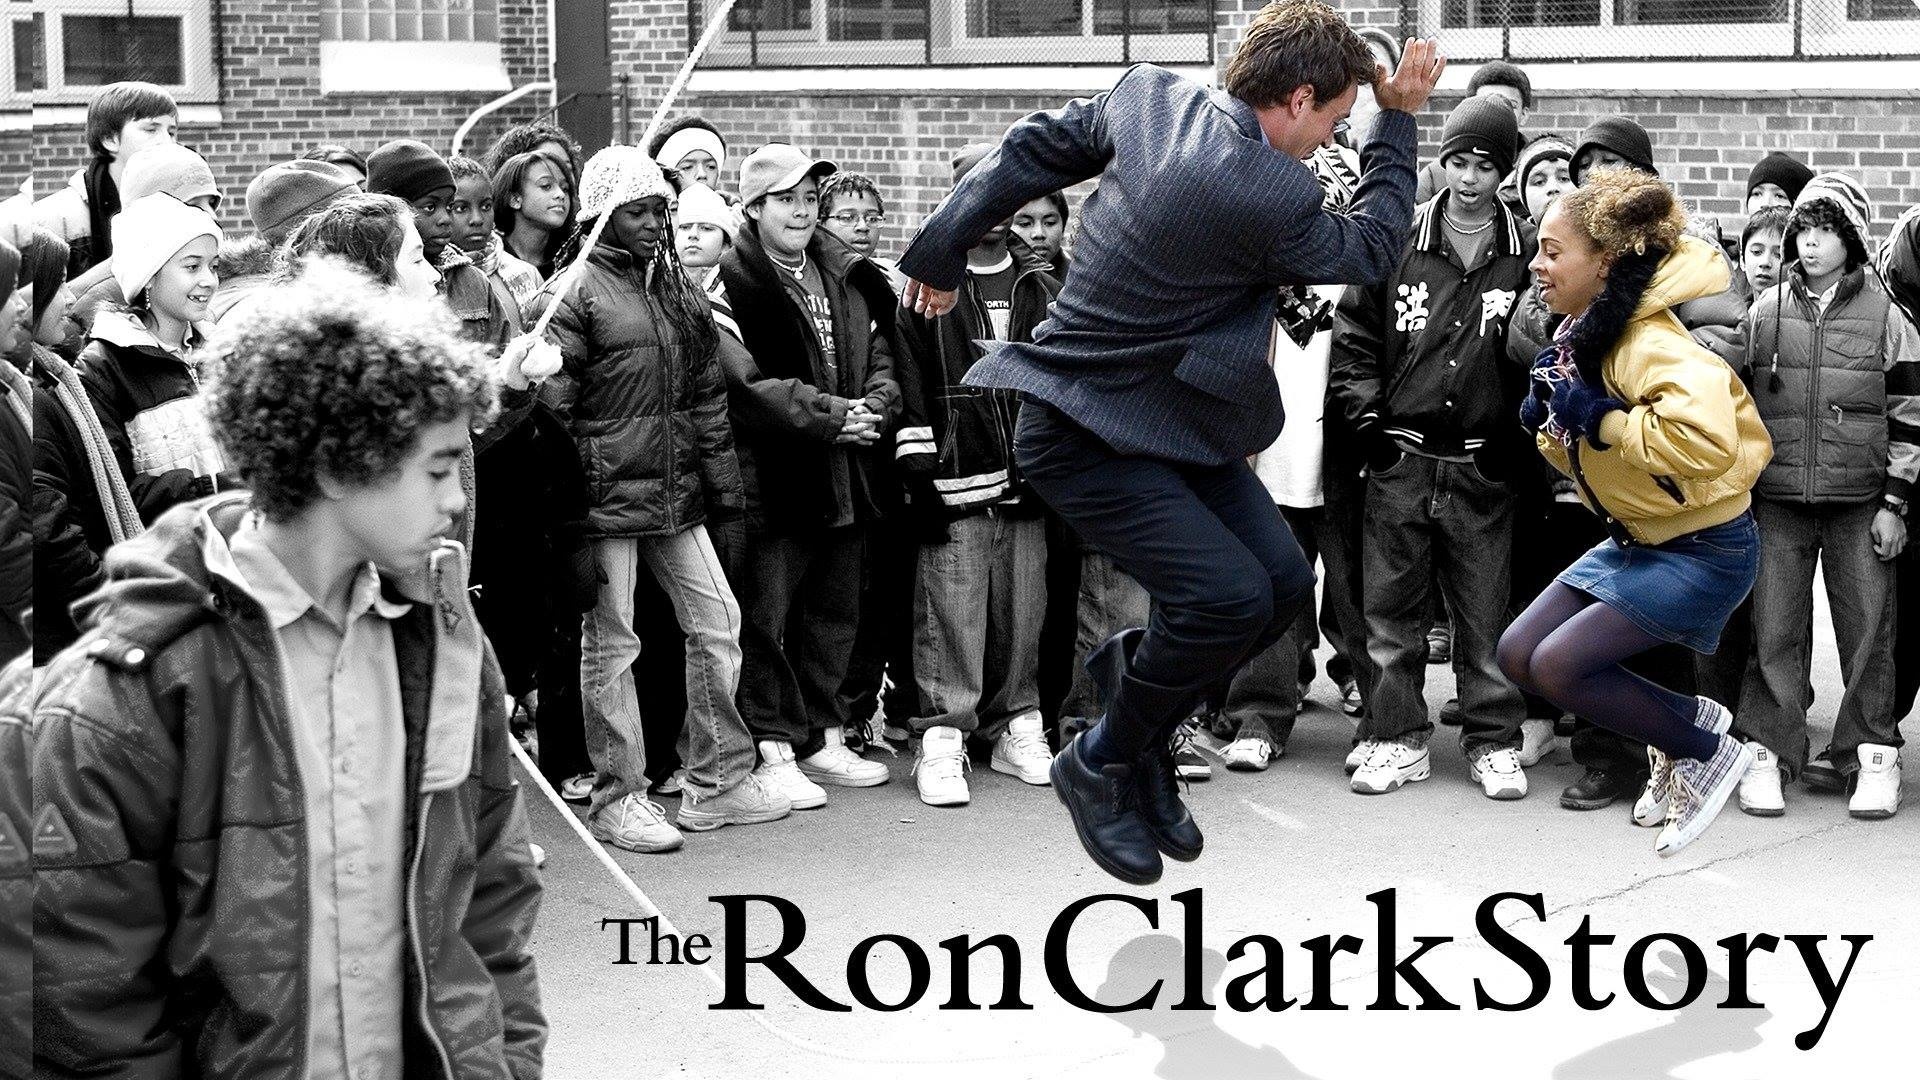 The Ron Clark Story (Movie): A very uplifting made-for-television film, Based on a true story, Directed by Randa Haines, TNT. 1920x1080 Full HD Wallpaper.